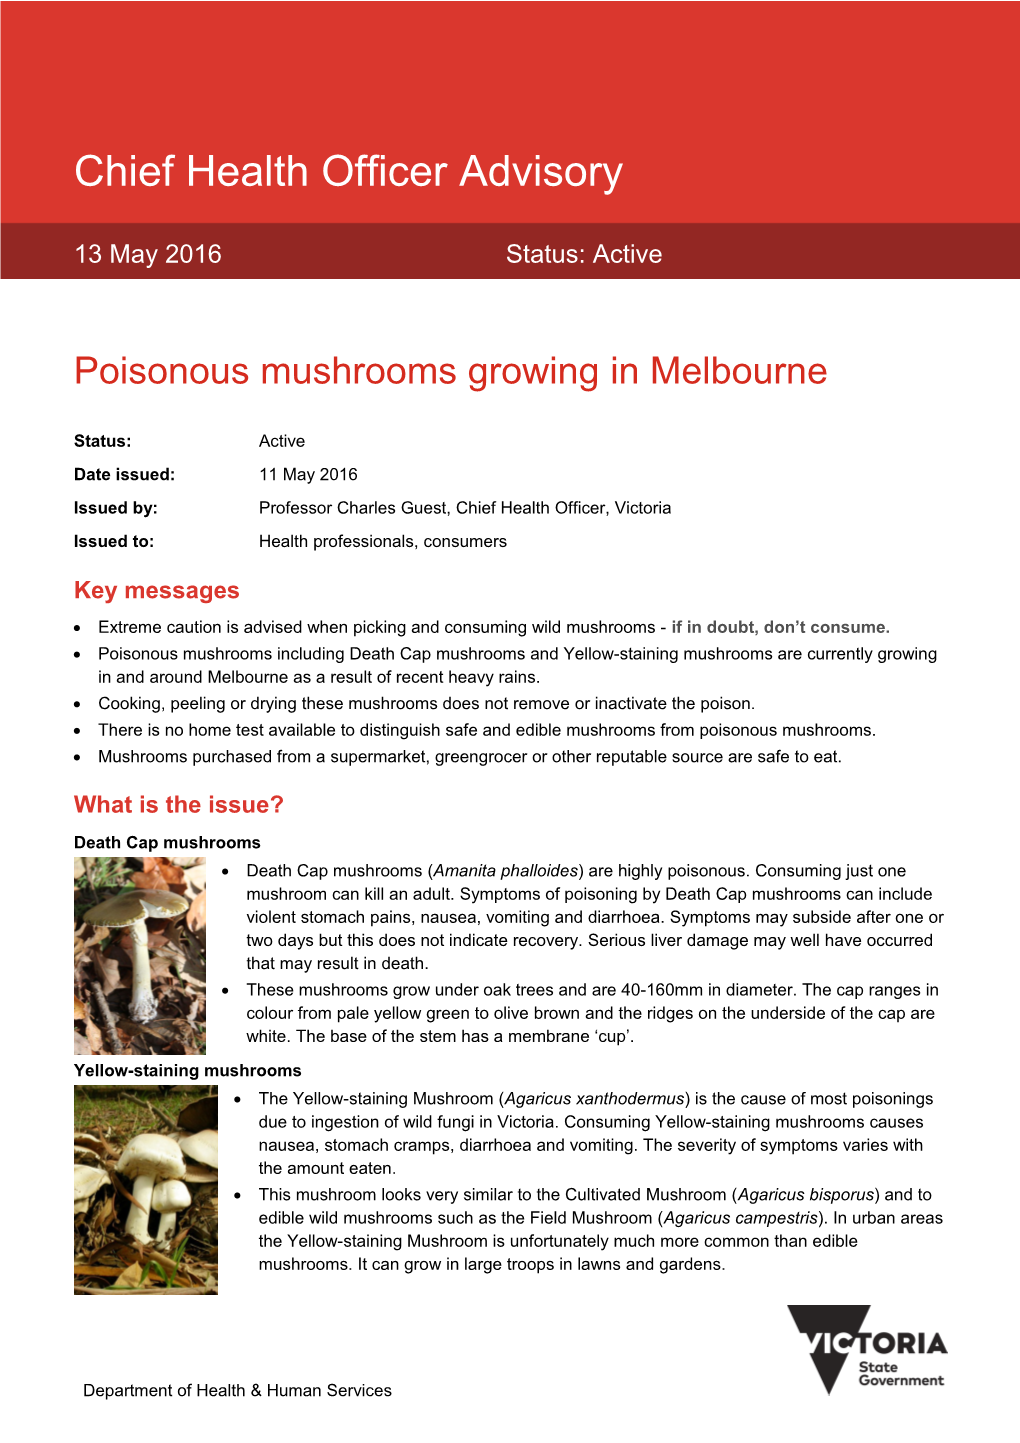 Poisonous Mushrooms Growing in Melbourne